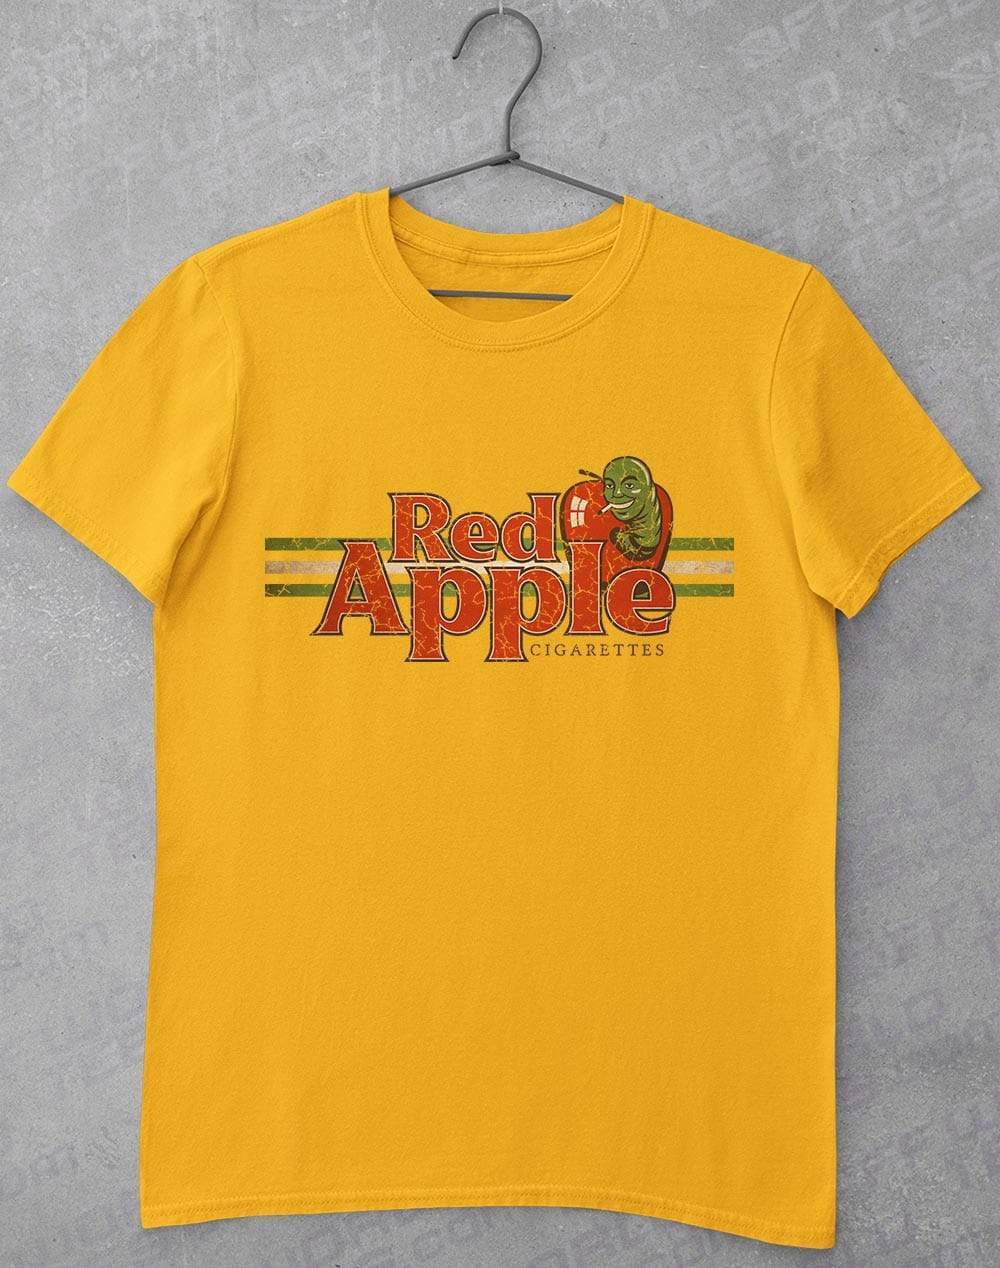 Red Apple Cigarettes T-Shirt L / Gold  - Off World Tees